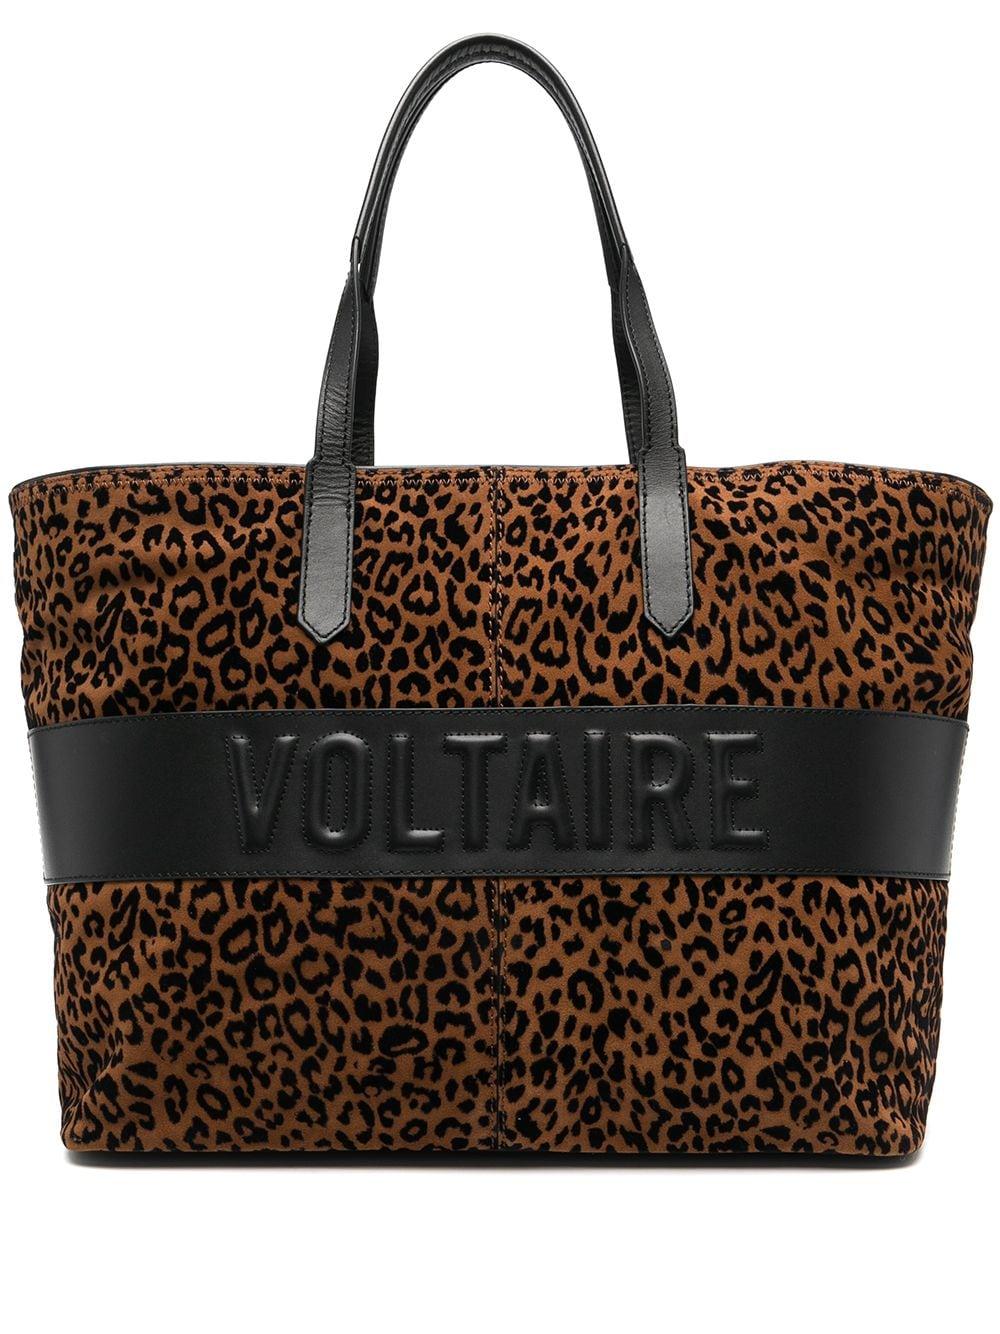 Zadig & Voltaire Leather Flocked Leopard Print Tote Bag in Brown - Lyst